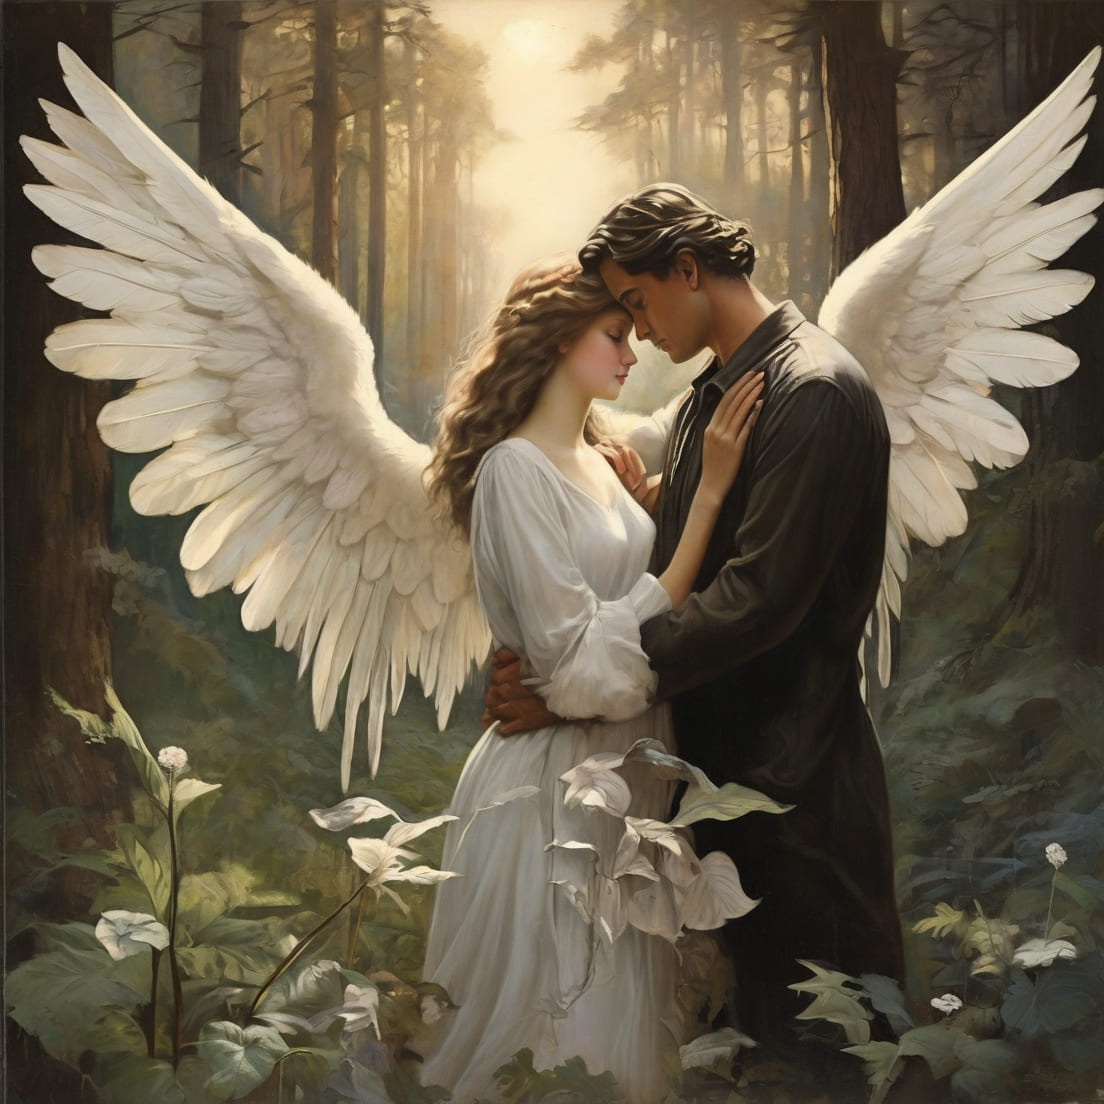 postcard, man, woman, forest, angel, love preview image.